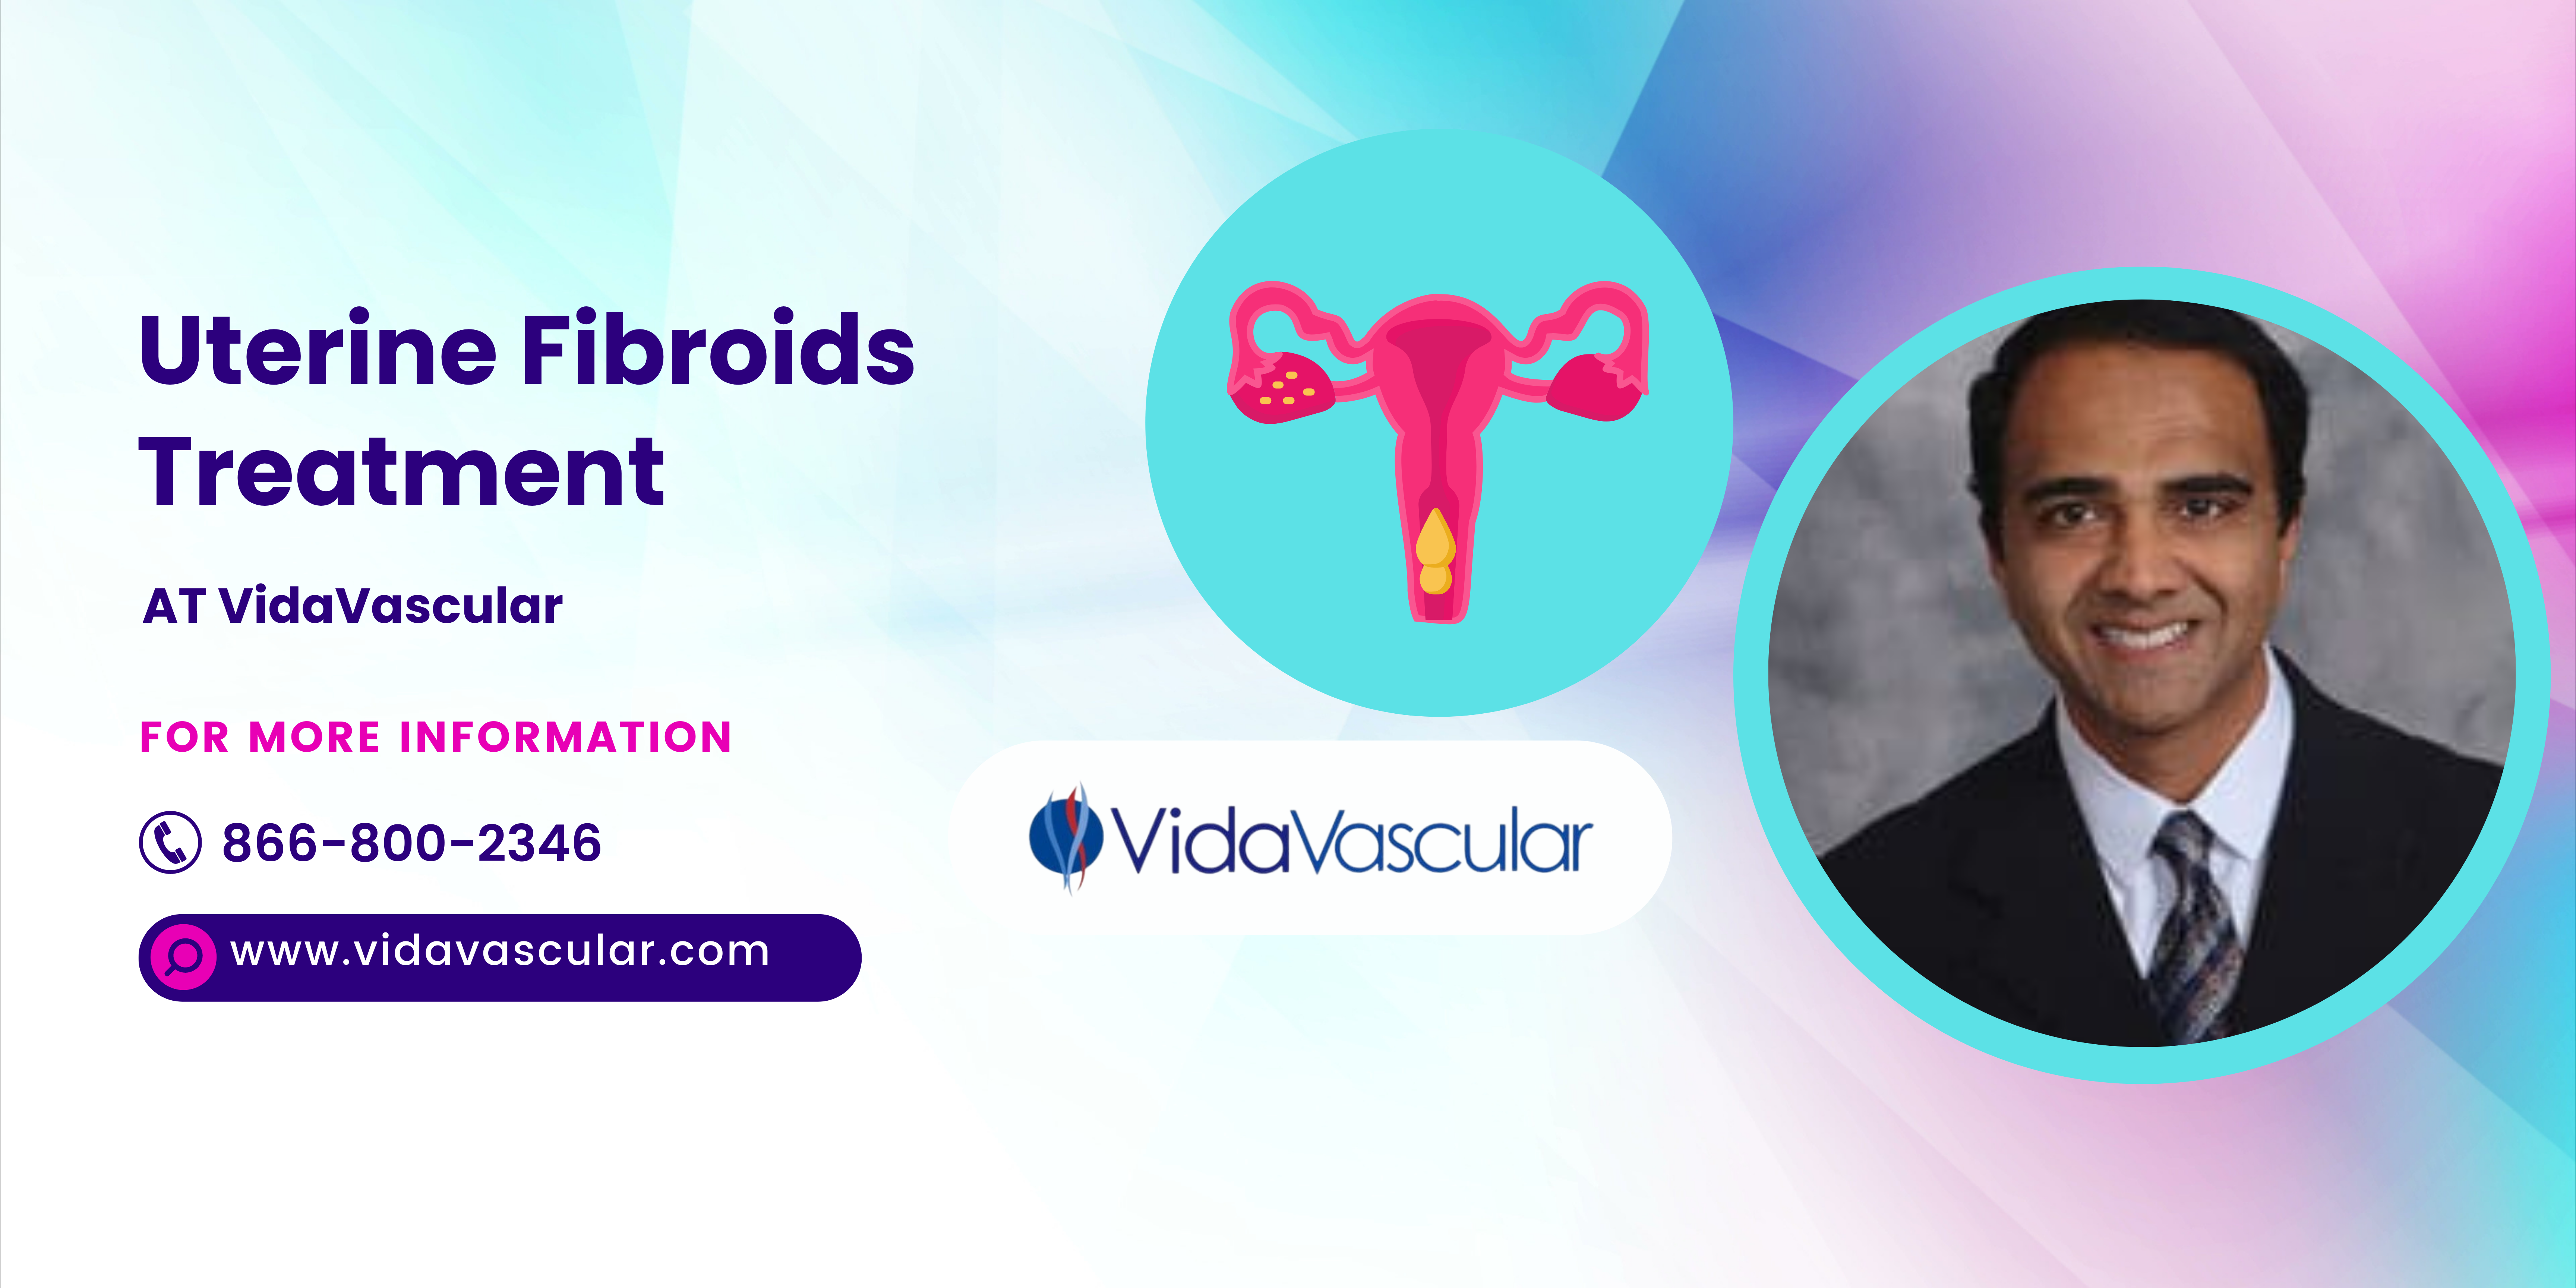 What are the symptoms of uterine fibroids & how can they be created?